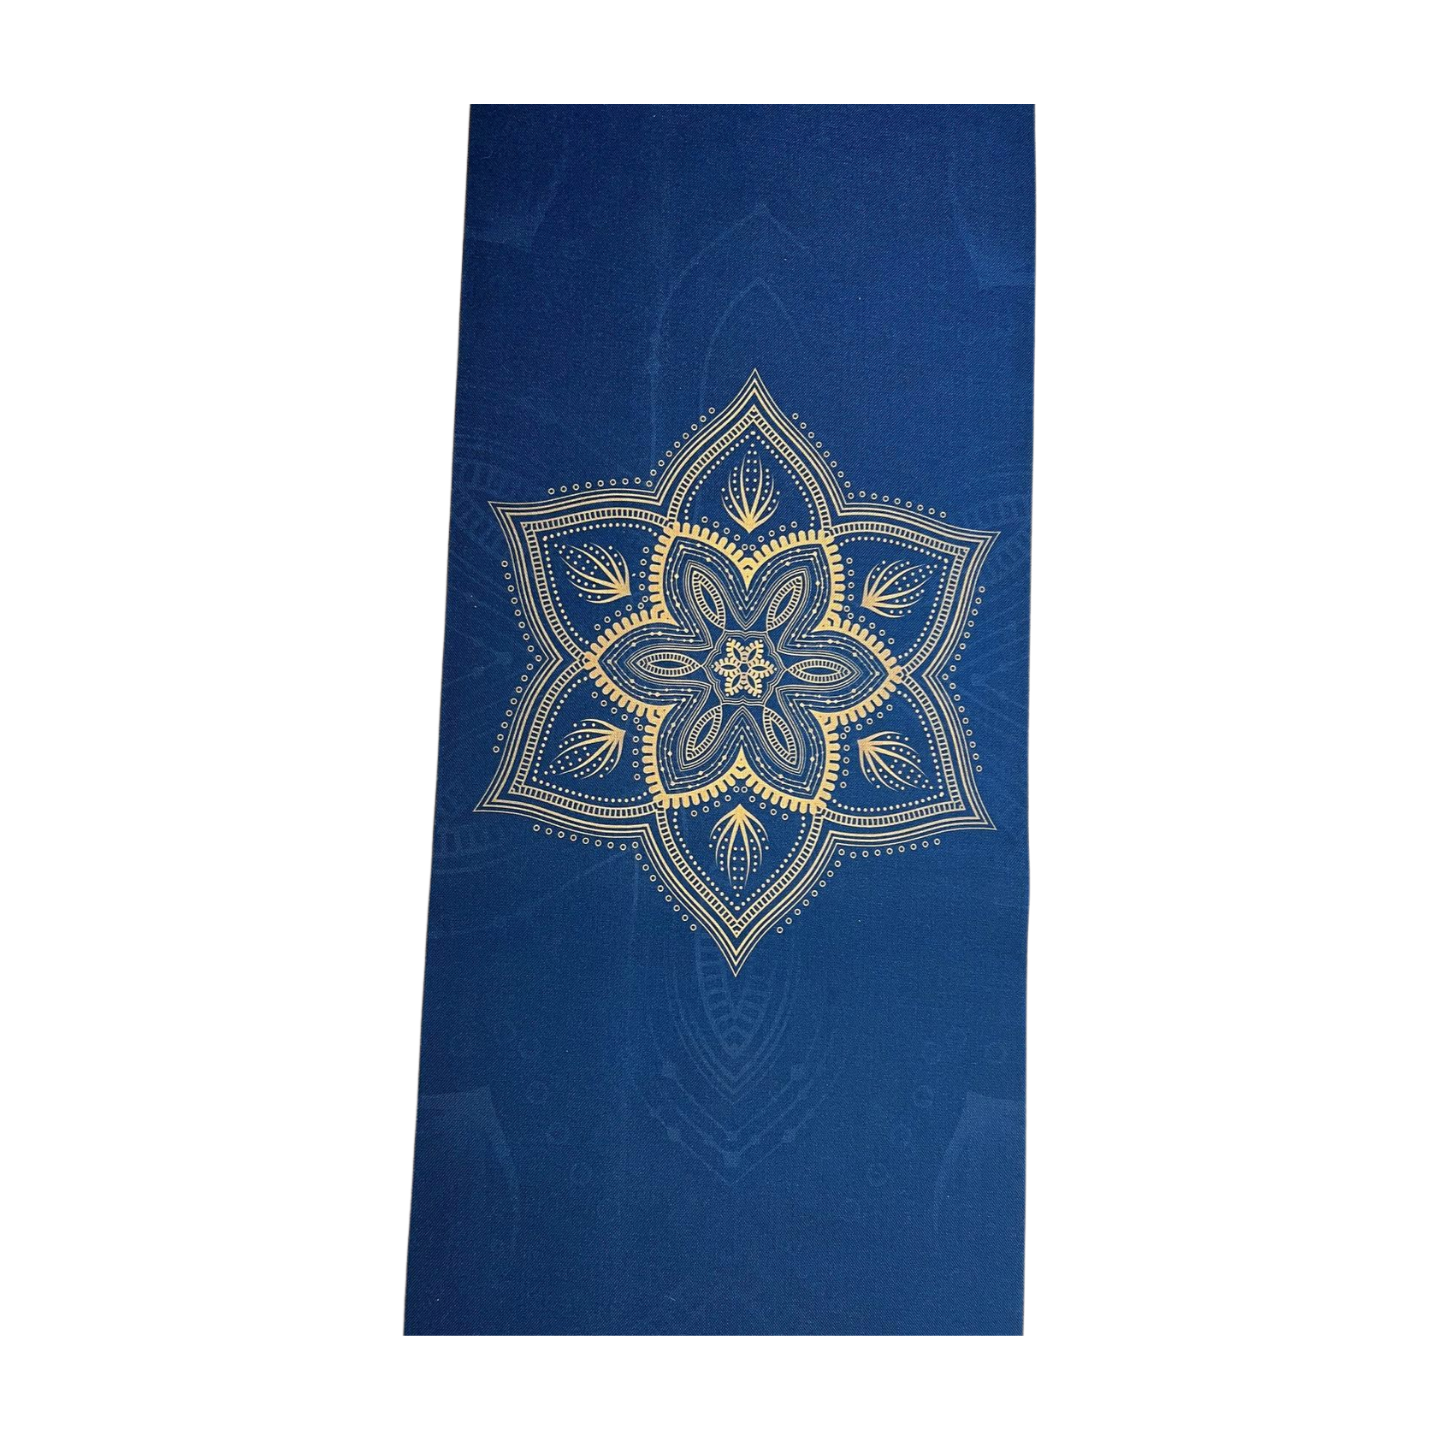 &quot;Skin-friendly hemp jute yoga mat: Soft top surface and non-slip base for a comfortable and secure practice.&quot;